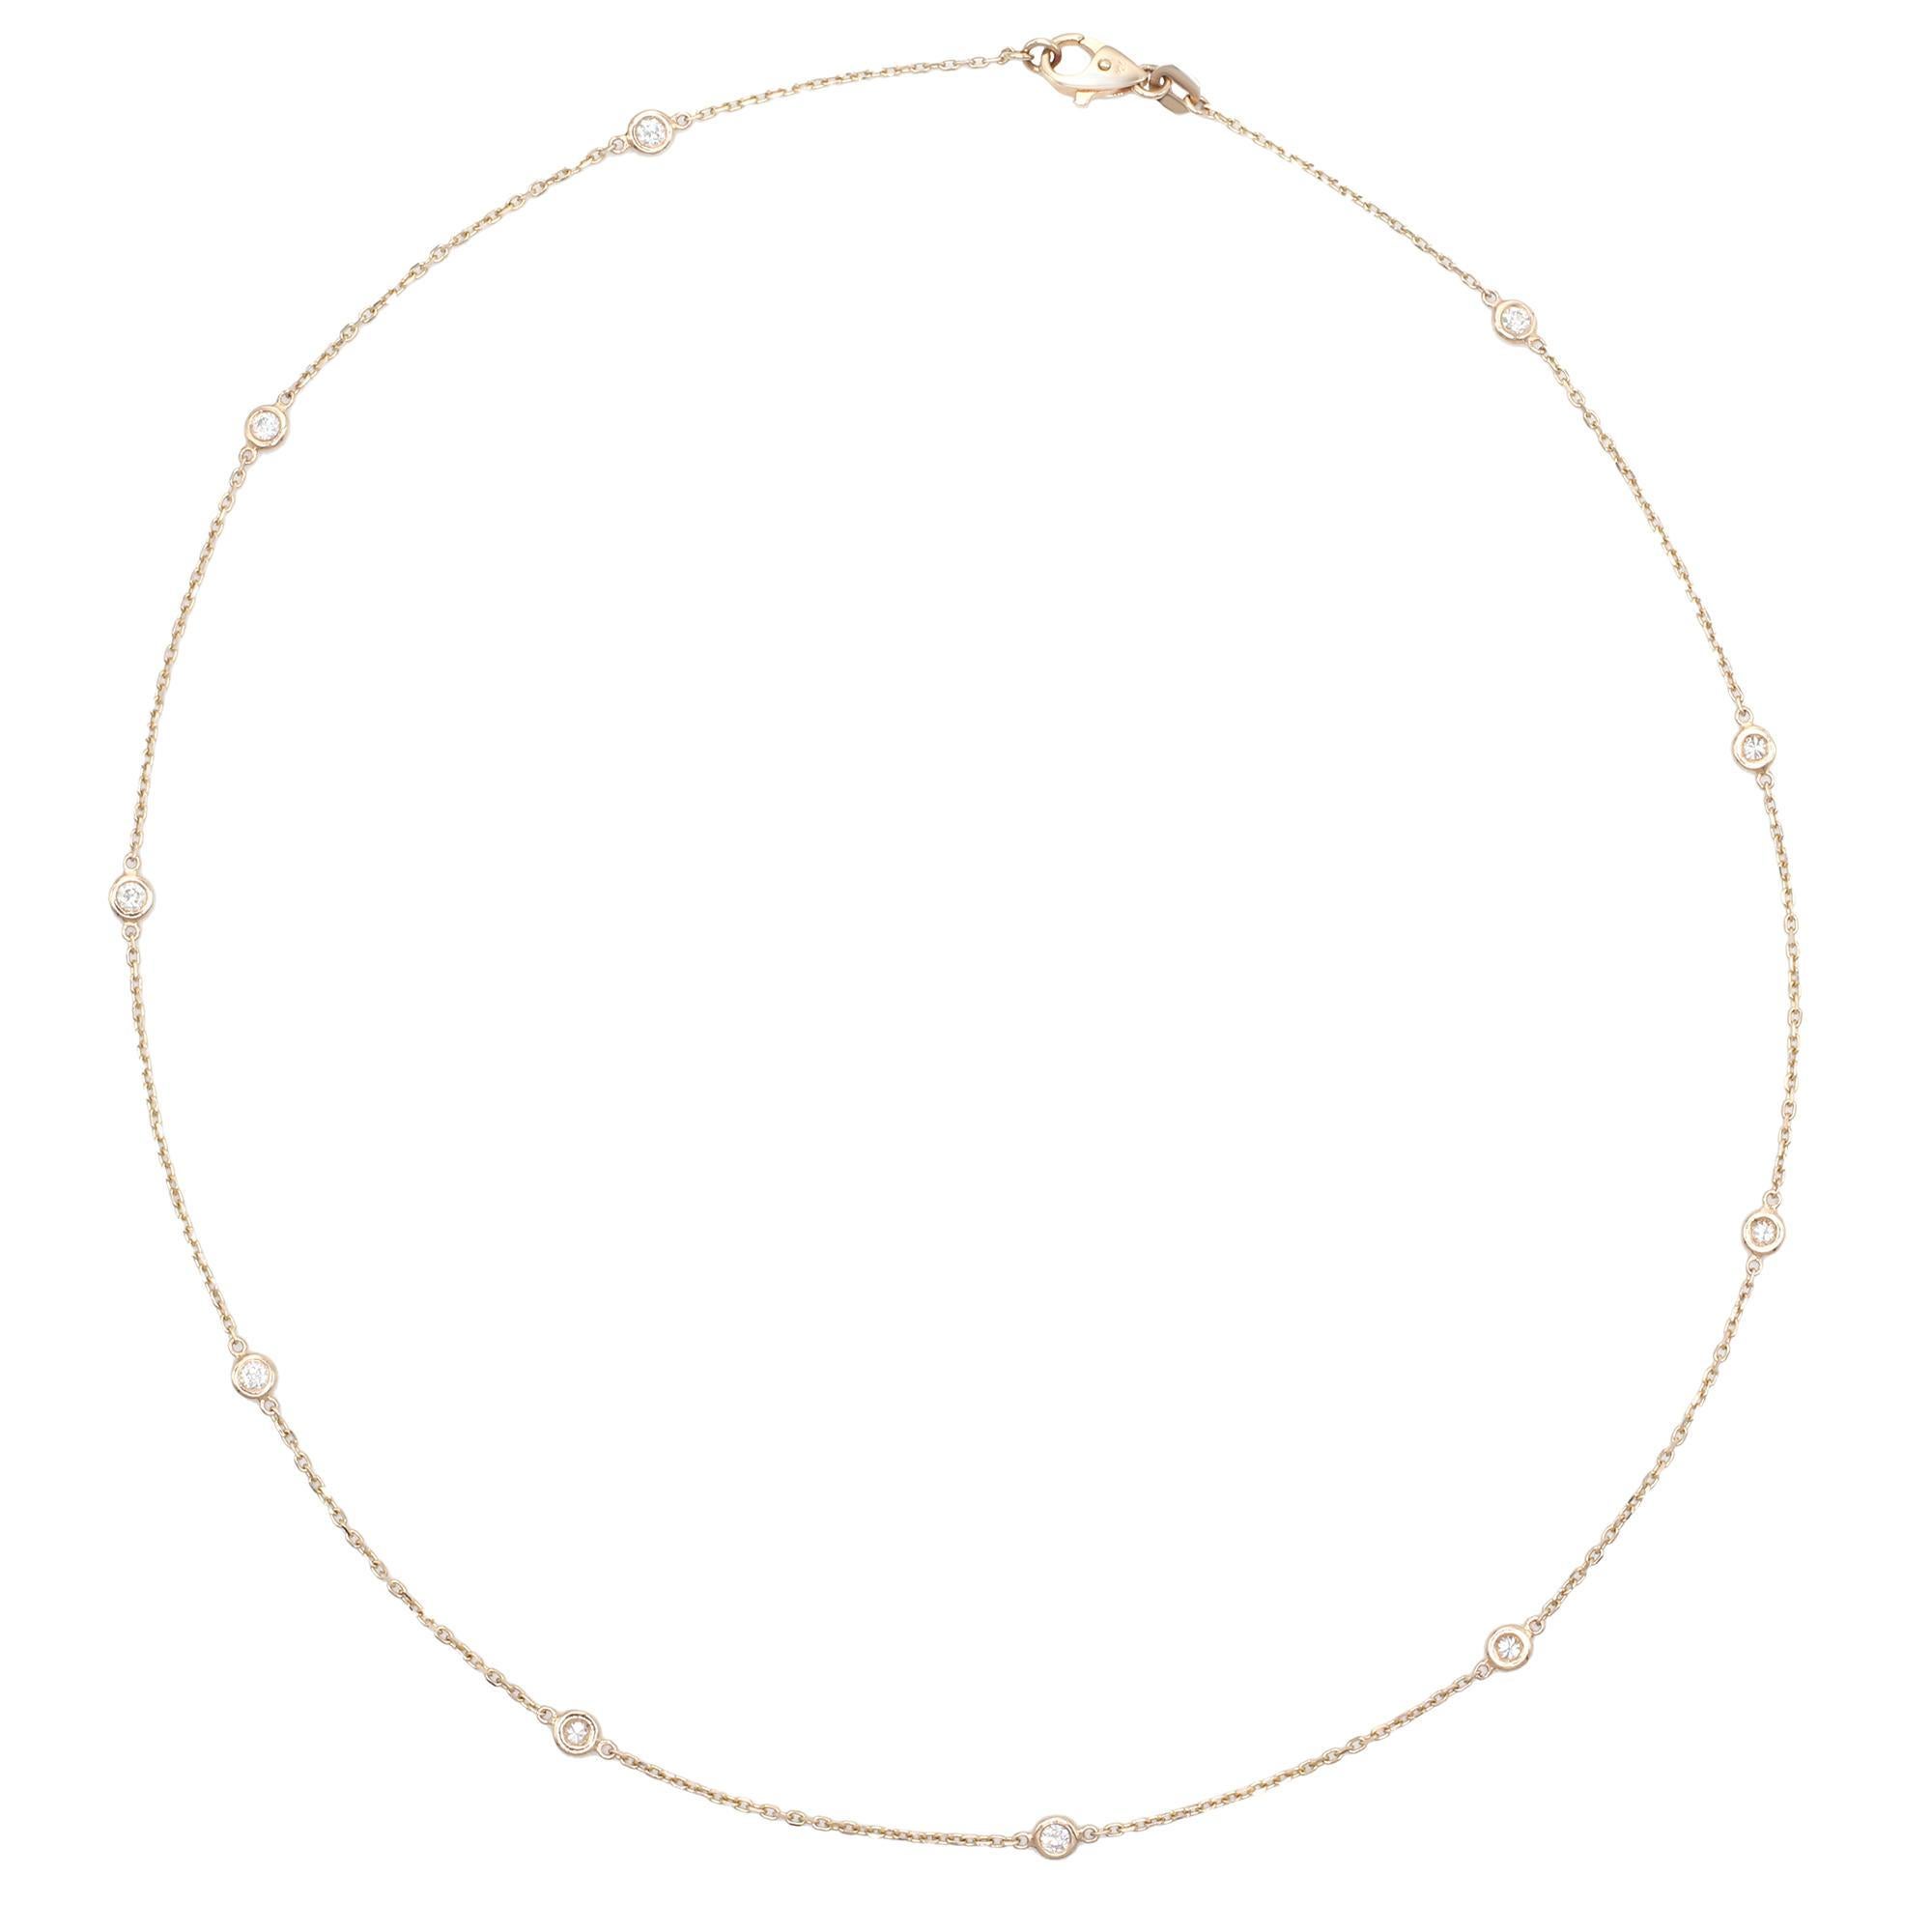 Stunning custom design 14k rose gold natural diamond by the yard necklace. Bezel set with 10 round brilliant diamonds weighing 0.61cttw. Diamonds are nearly colorless with G-H color, and VS-SI clarity. Chain length: 18 inches. Comes with a